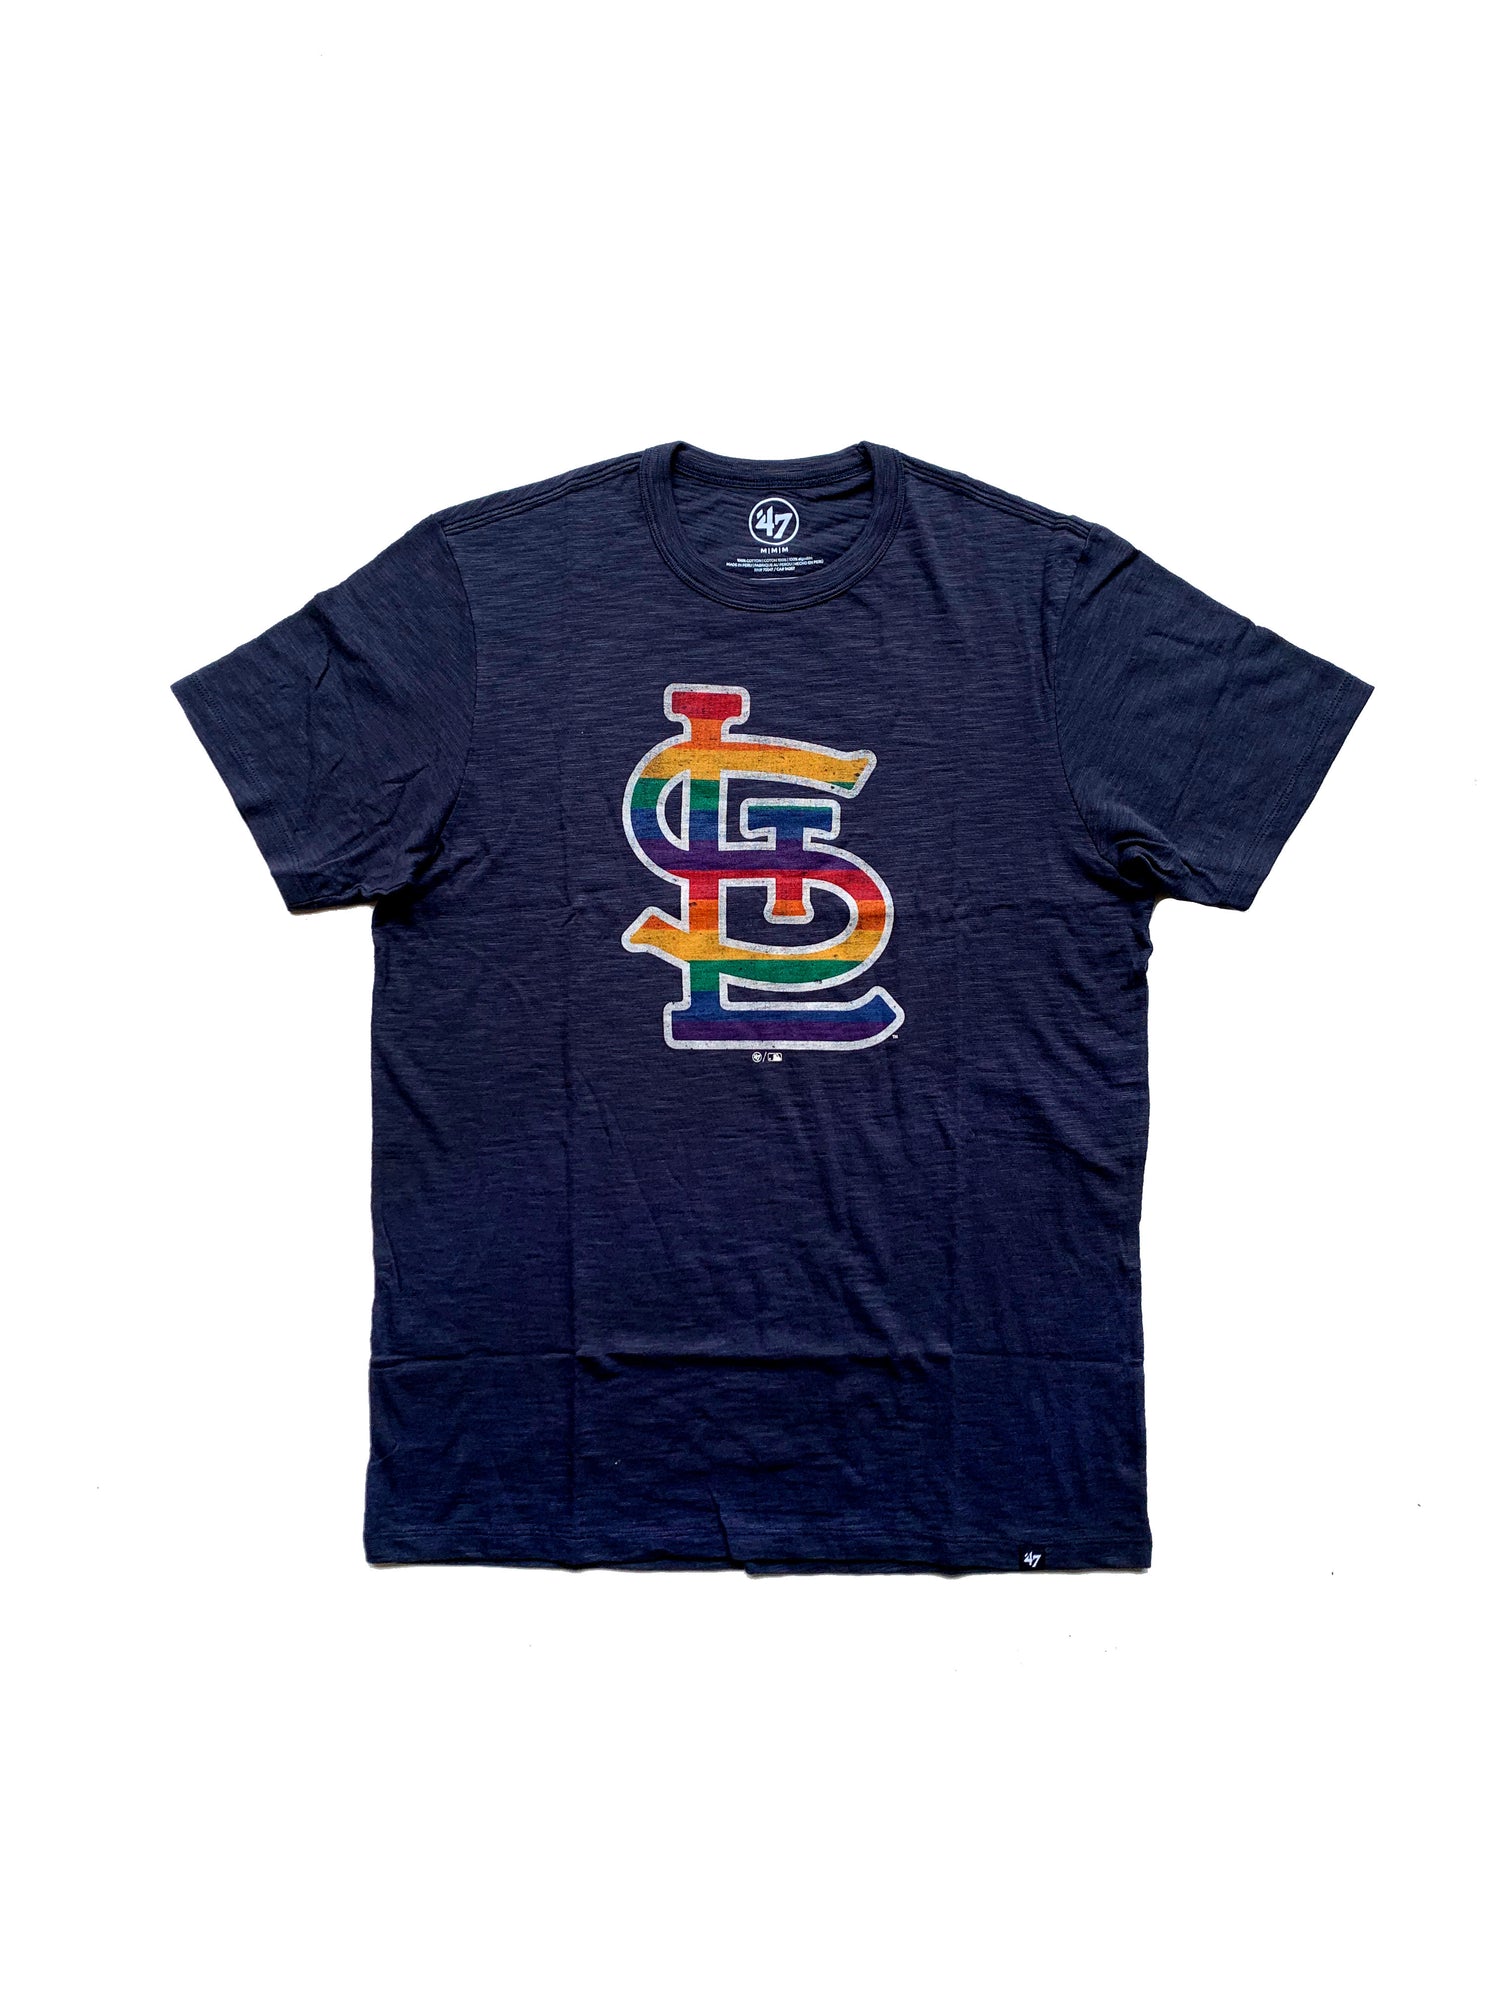 Front view St. Louis Cardinals Rainbow Pride Navy scrum Shirt with Screened STL Rainbow logo from '47 Brand made from 100% cotton scrum